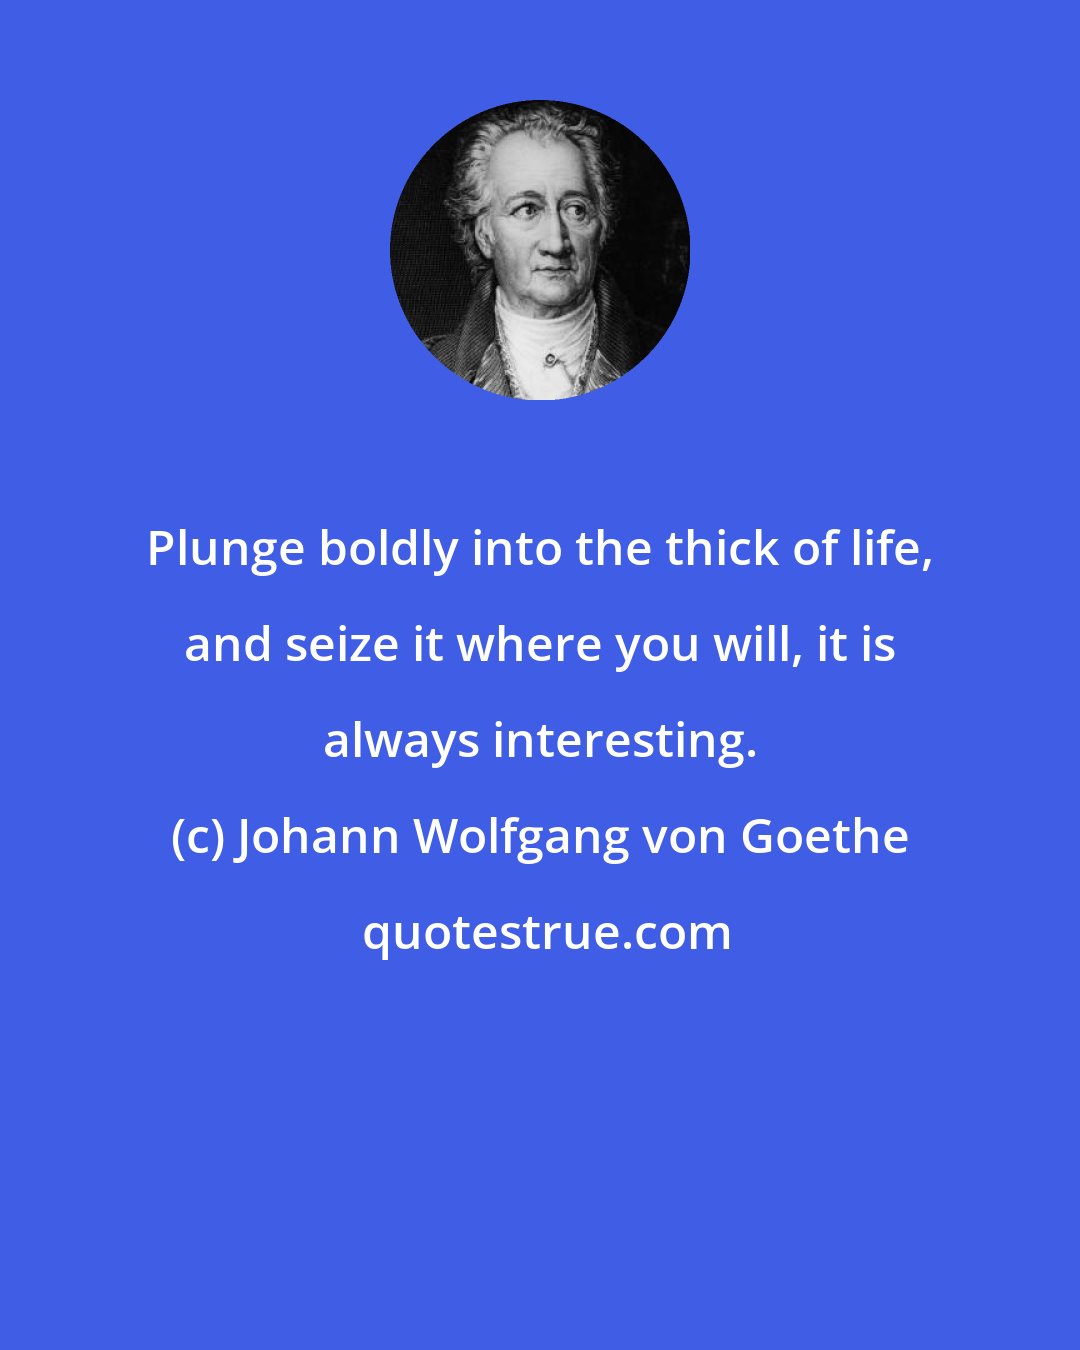 Johann Wolfgang von Goethe: Plunge boldly into the thick of life, and seize it where you will, it is always interesting.